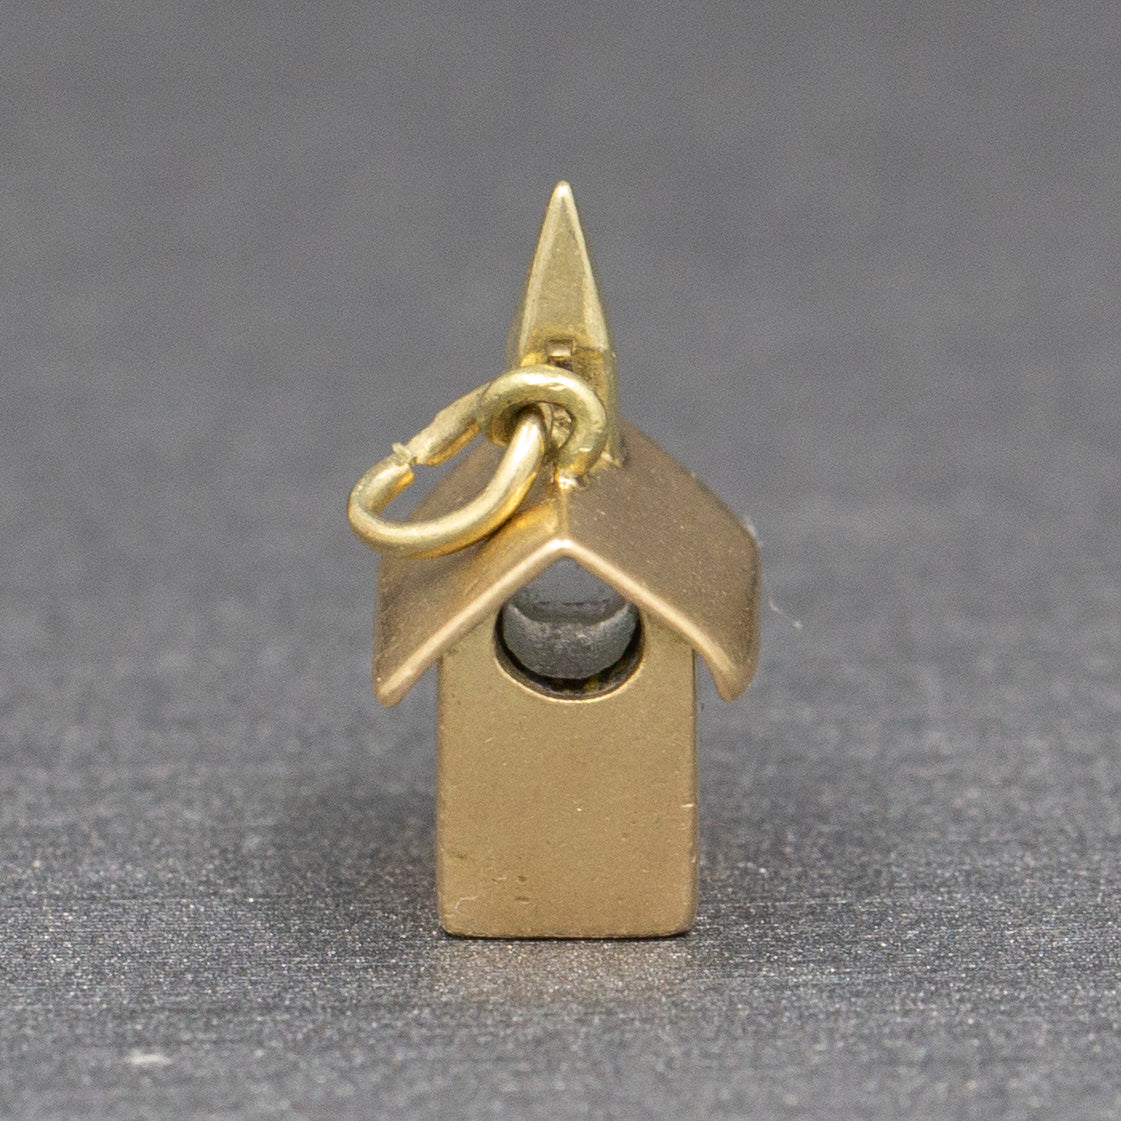 Vintage Miniature Church with Steeple Charm Pendant in 14k Yellow Gold